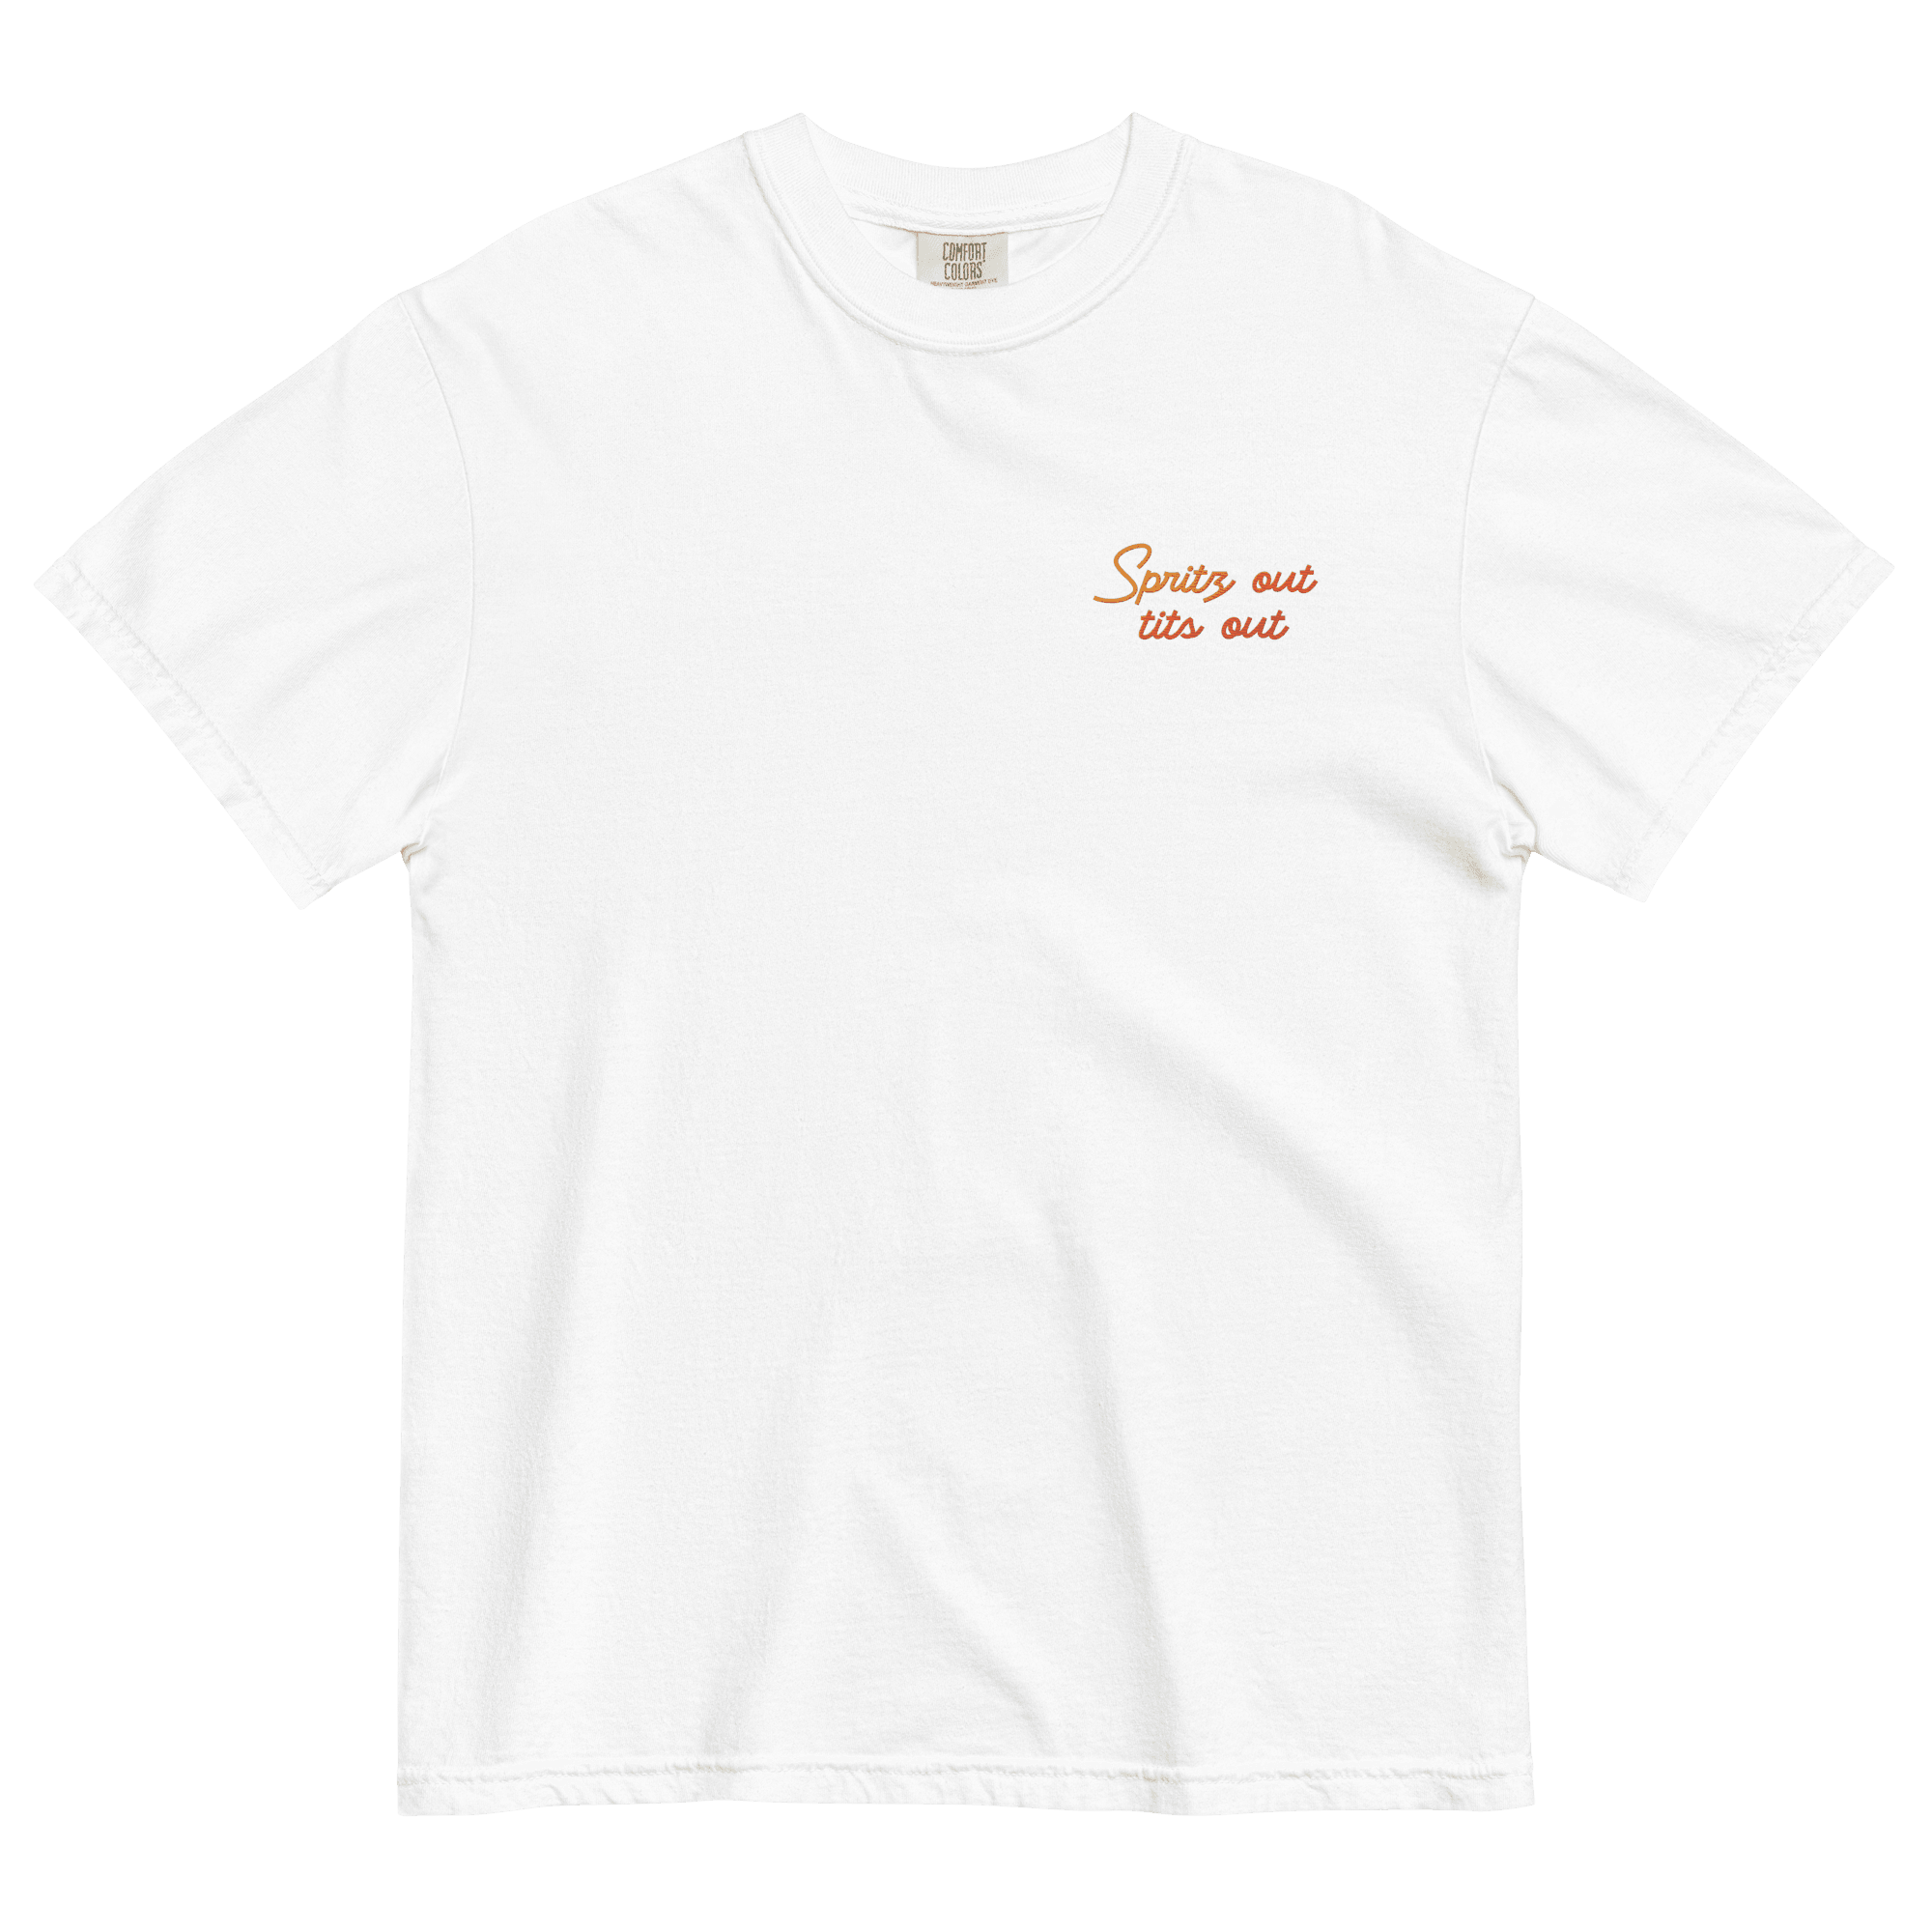 Spritz out, tits out Embroidered T-shirt - Polychrome Goods 🍊